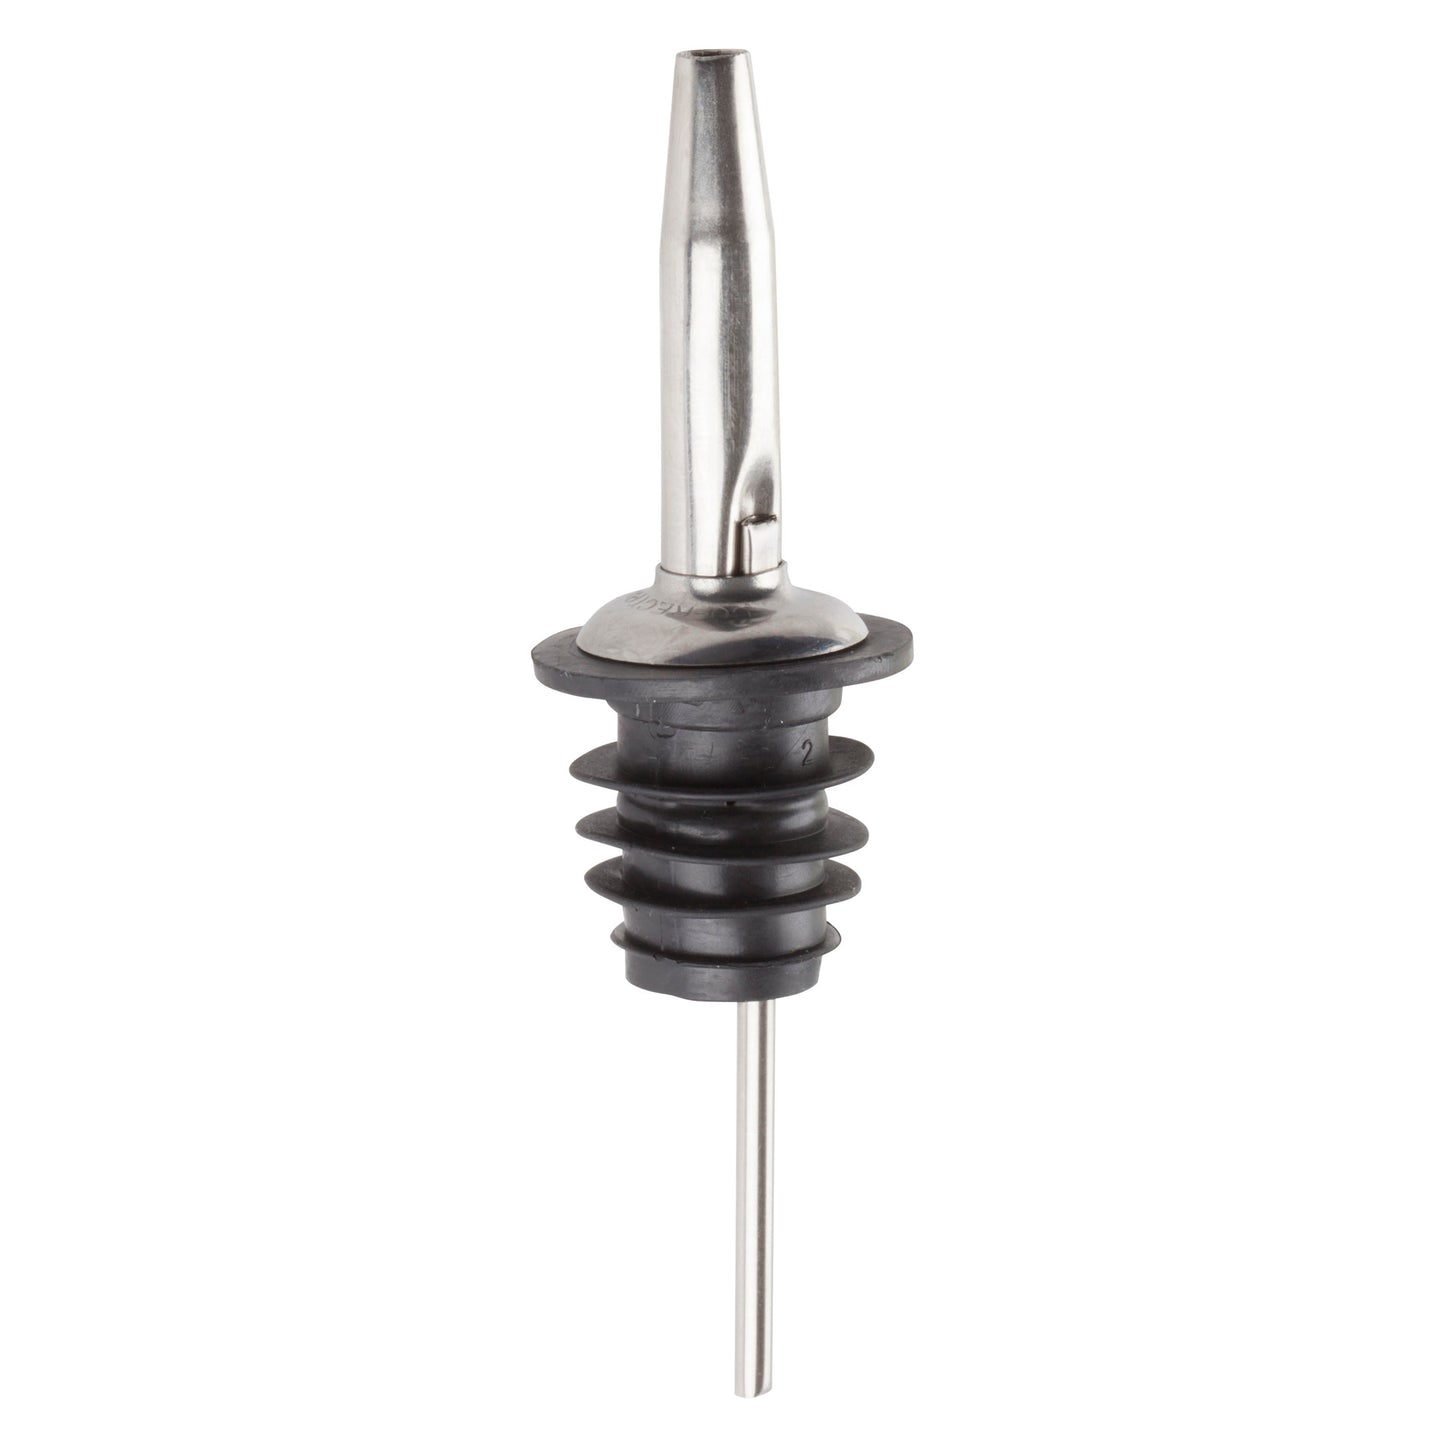 PPM-4 - Metal Pourers, Tapered Spout, Black Plastic Stopper